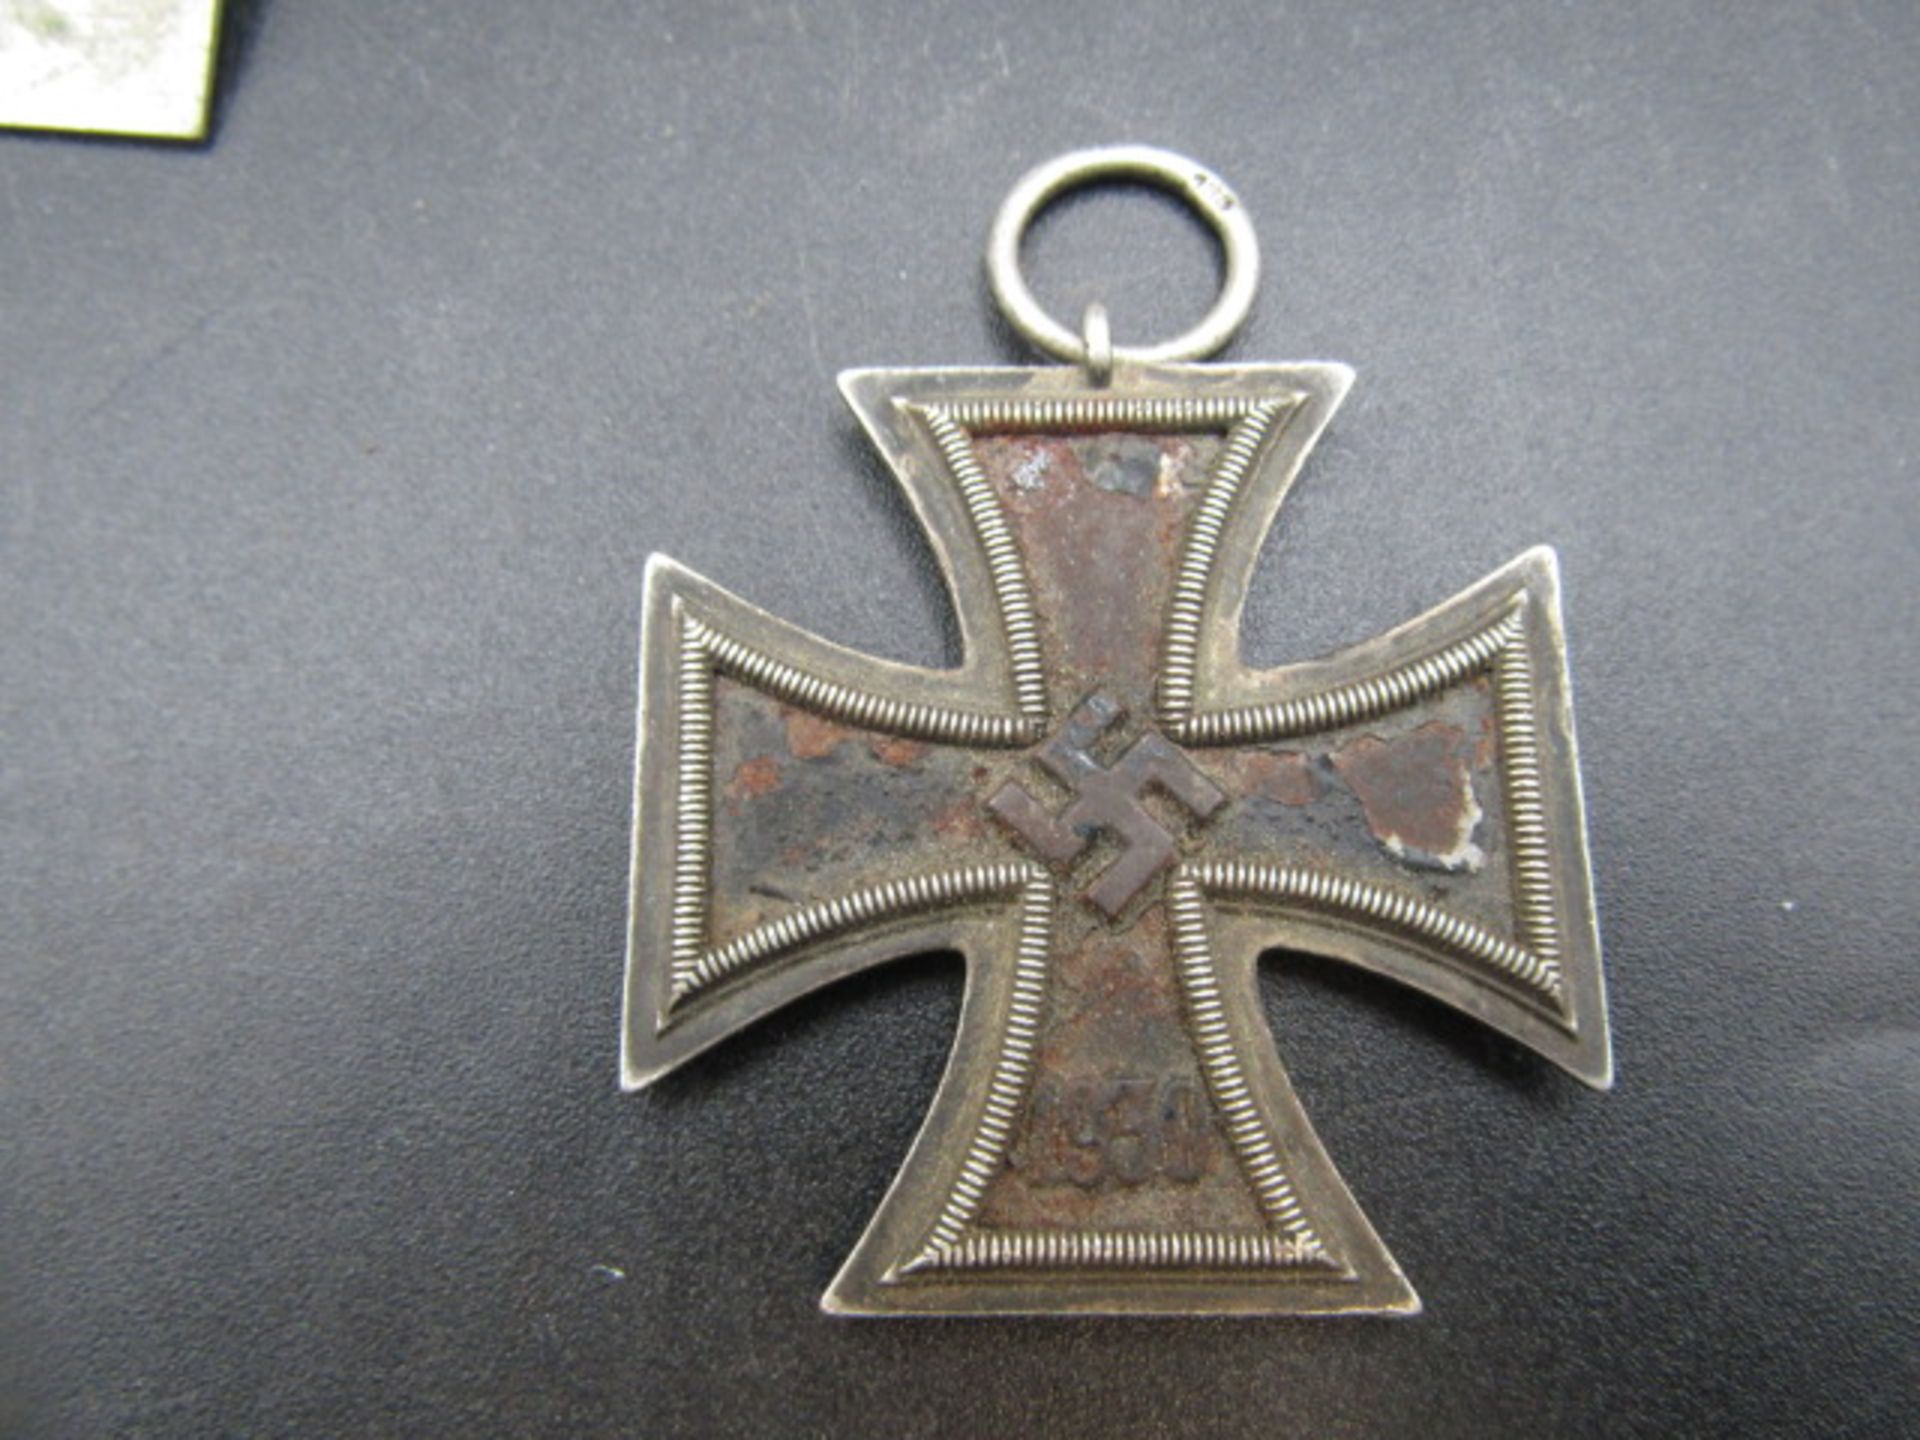 WW2 iron cross and various insignia badges and patches plus a charm bracelet - Image 6 of 9